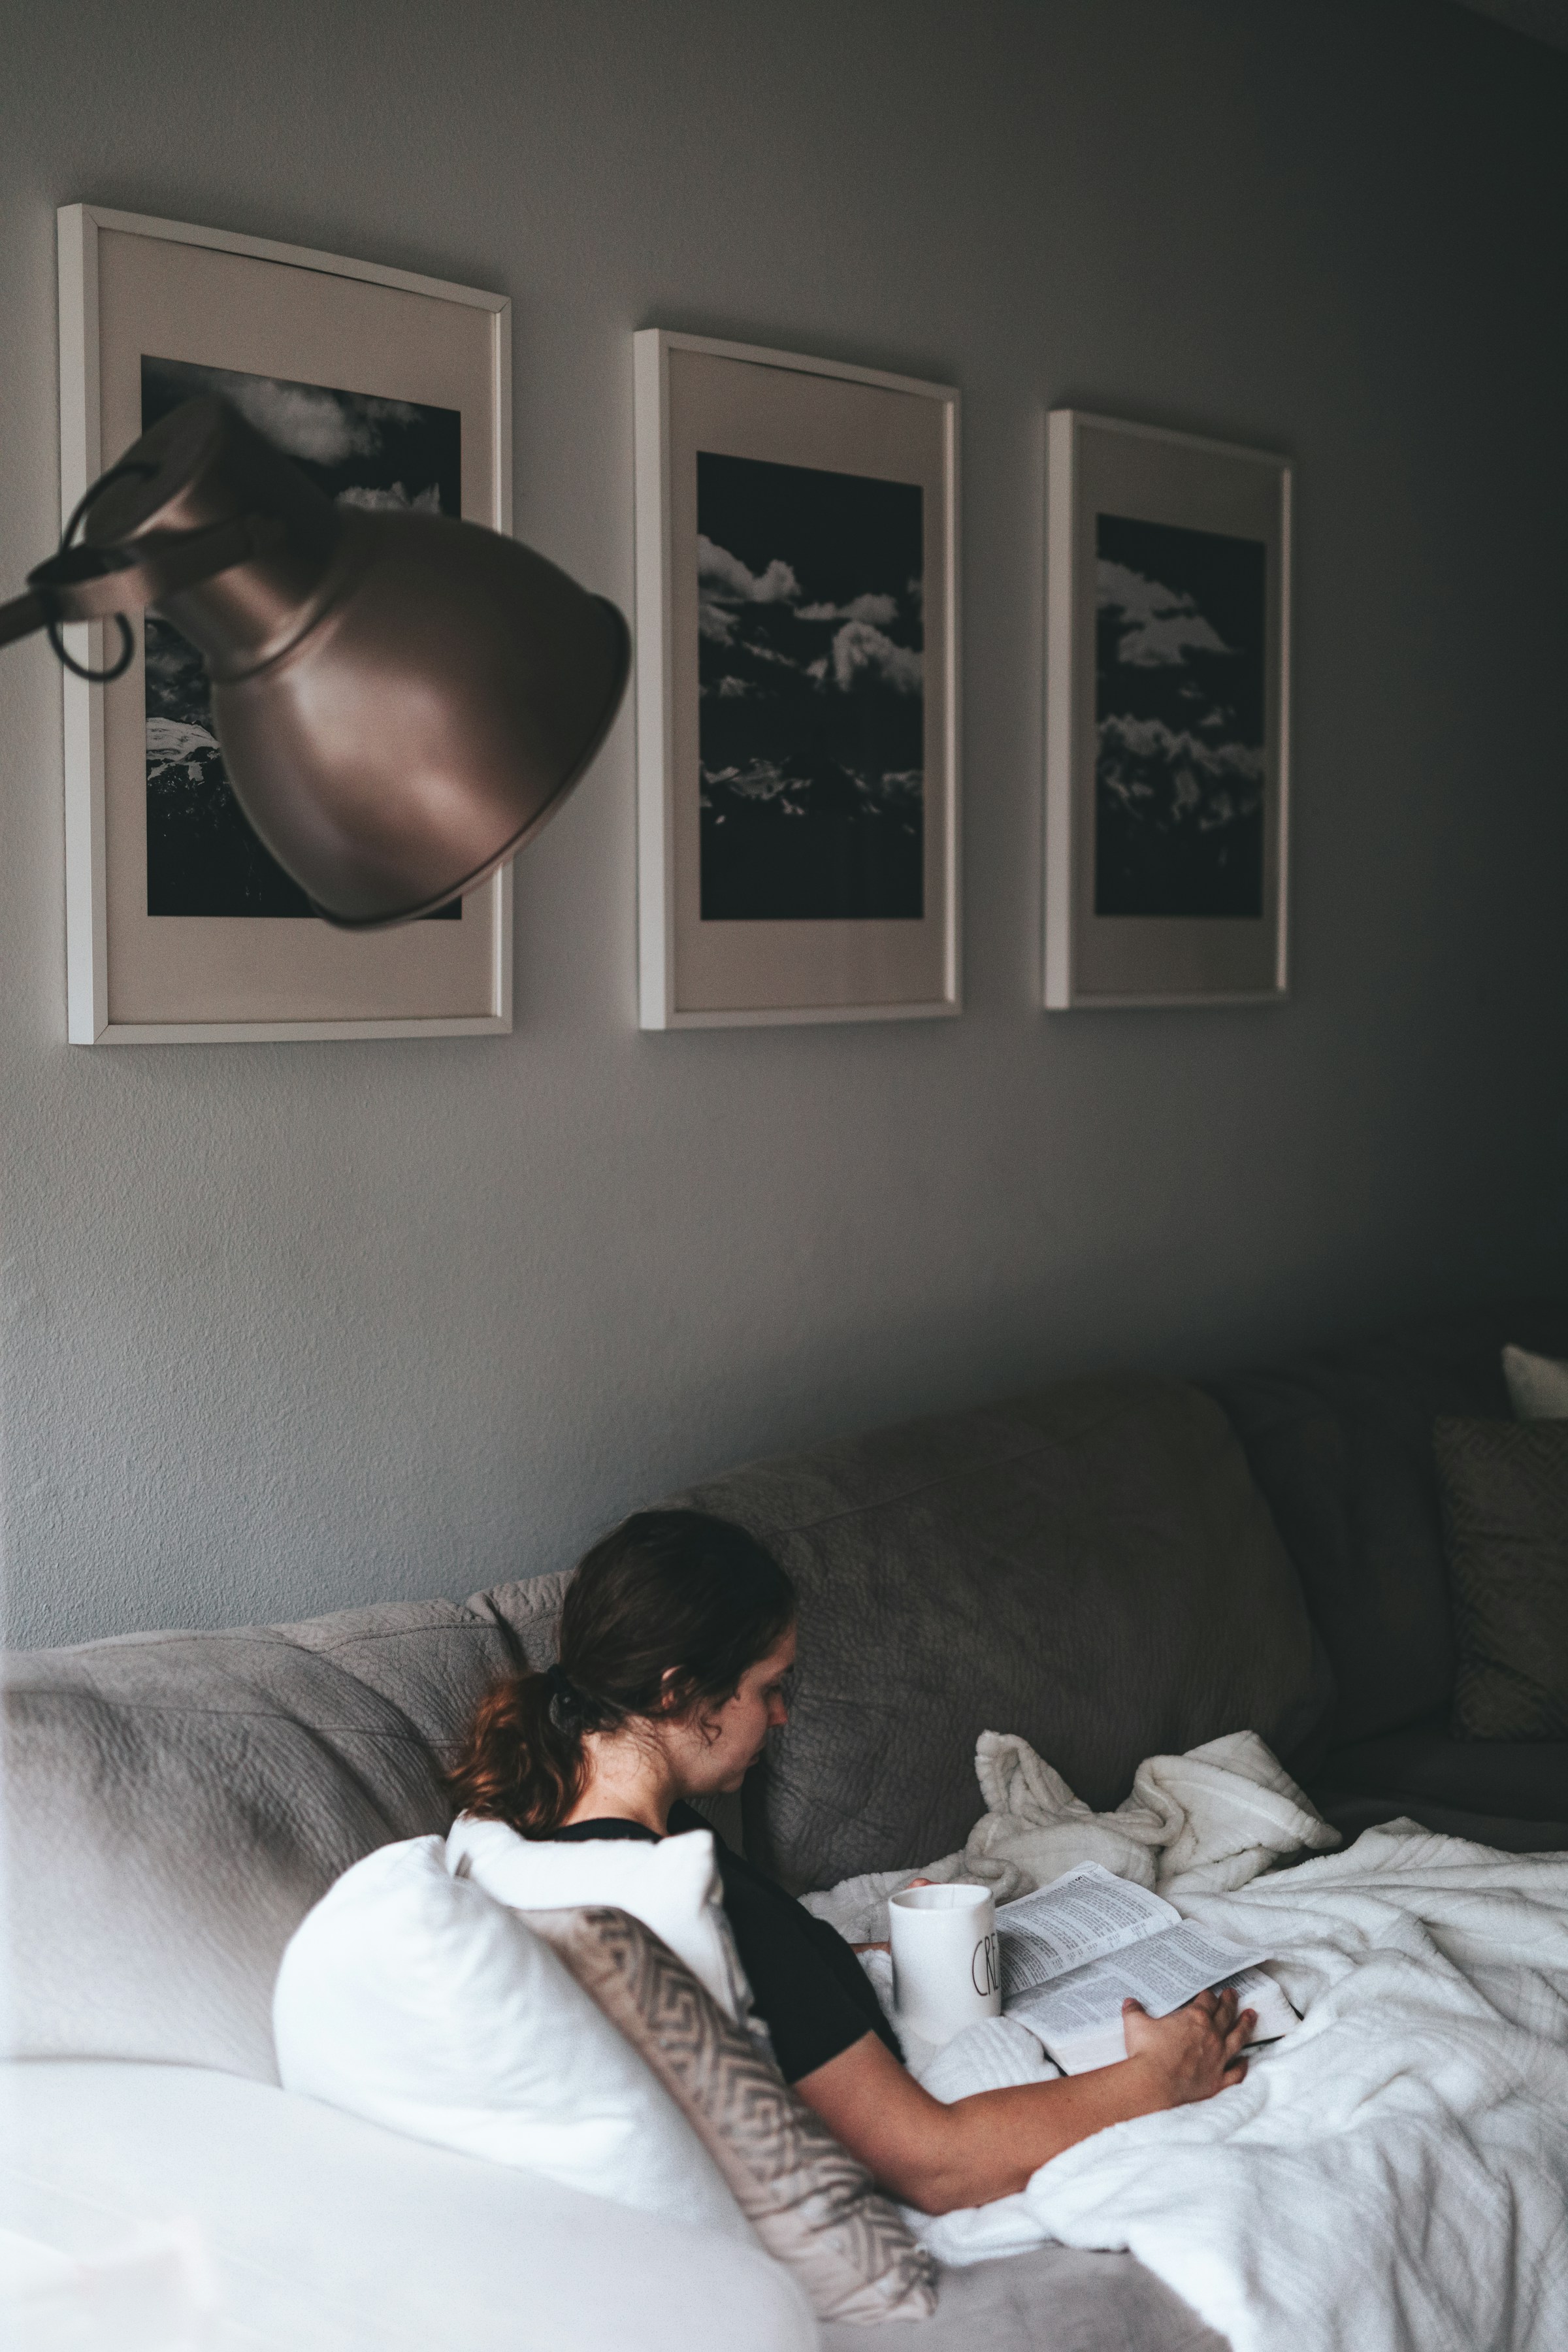 A woman reading on a couch | Source: Unsplash